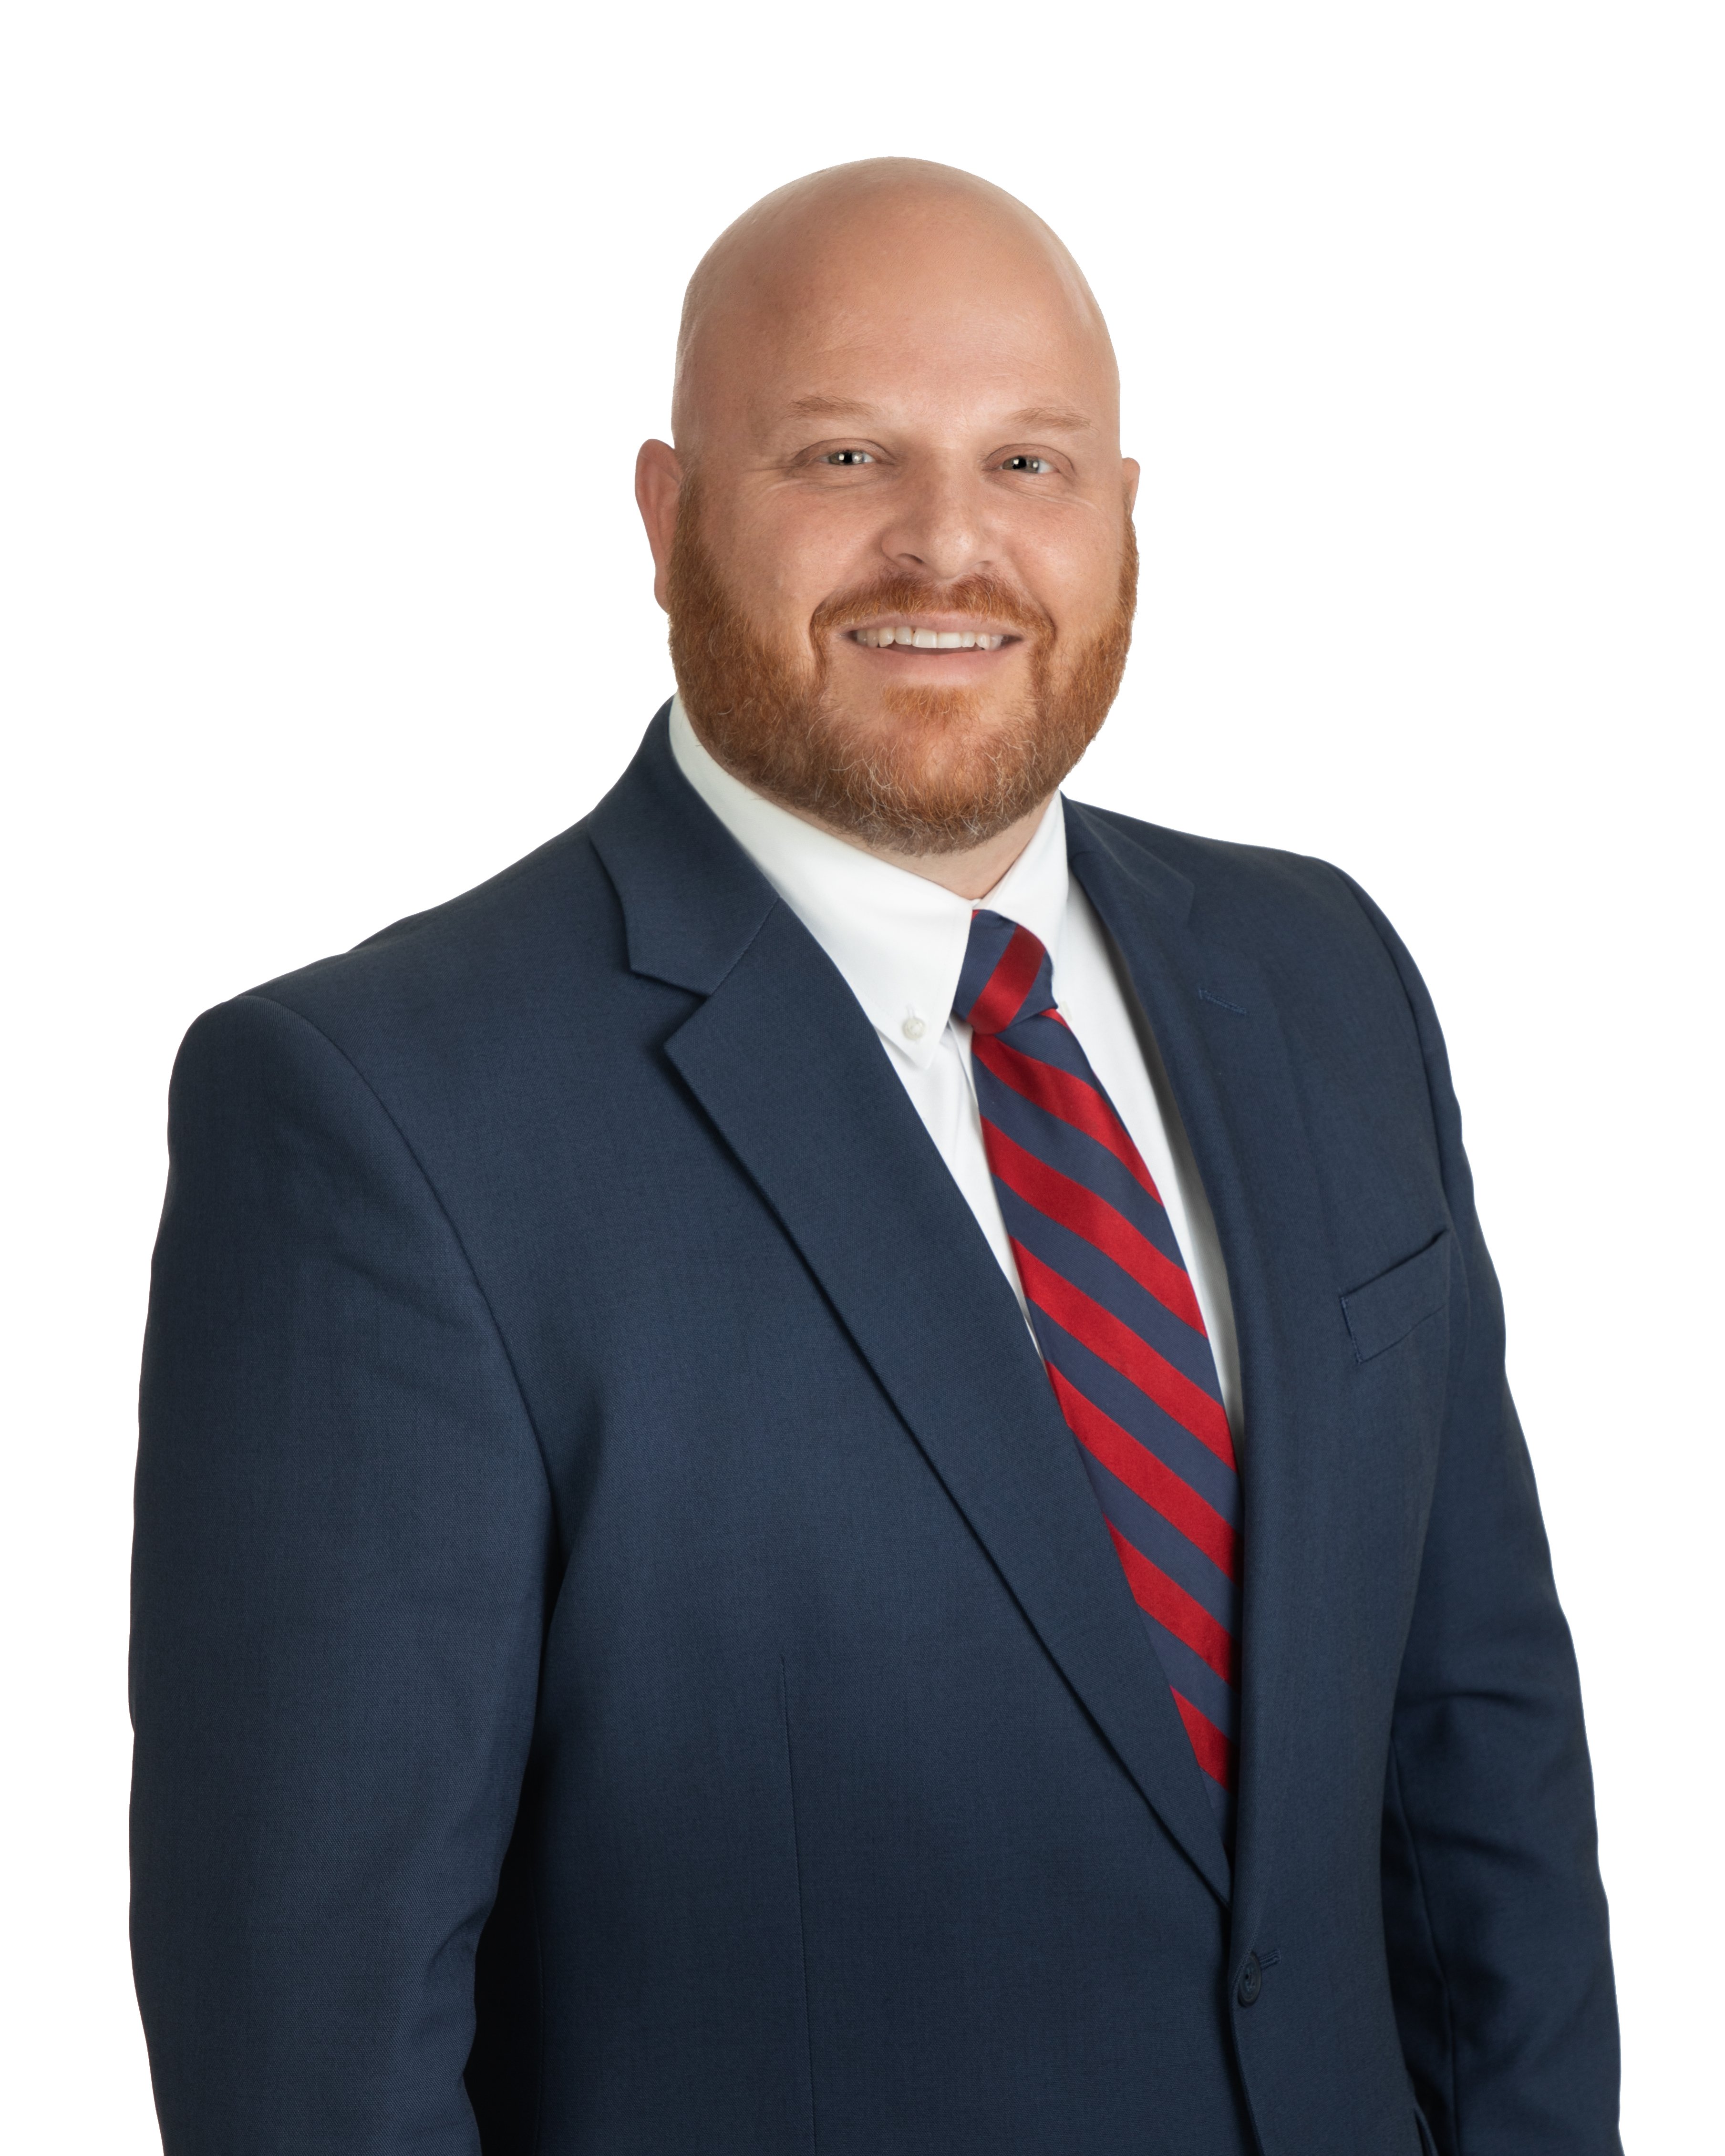 James Jerome brings more than two decades of experience in community banking and finance to his new position as commercial banker at Englewood Bank & Trust, part of the Crews Banking Family.